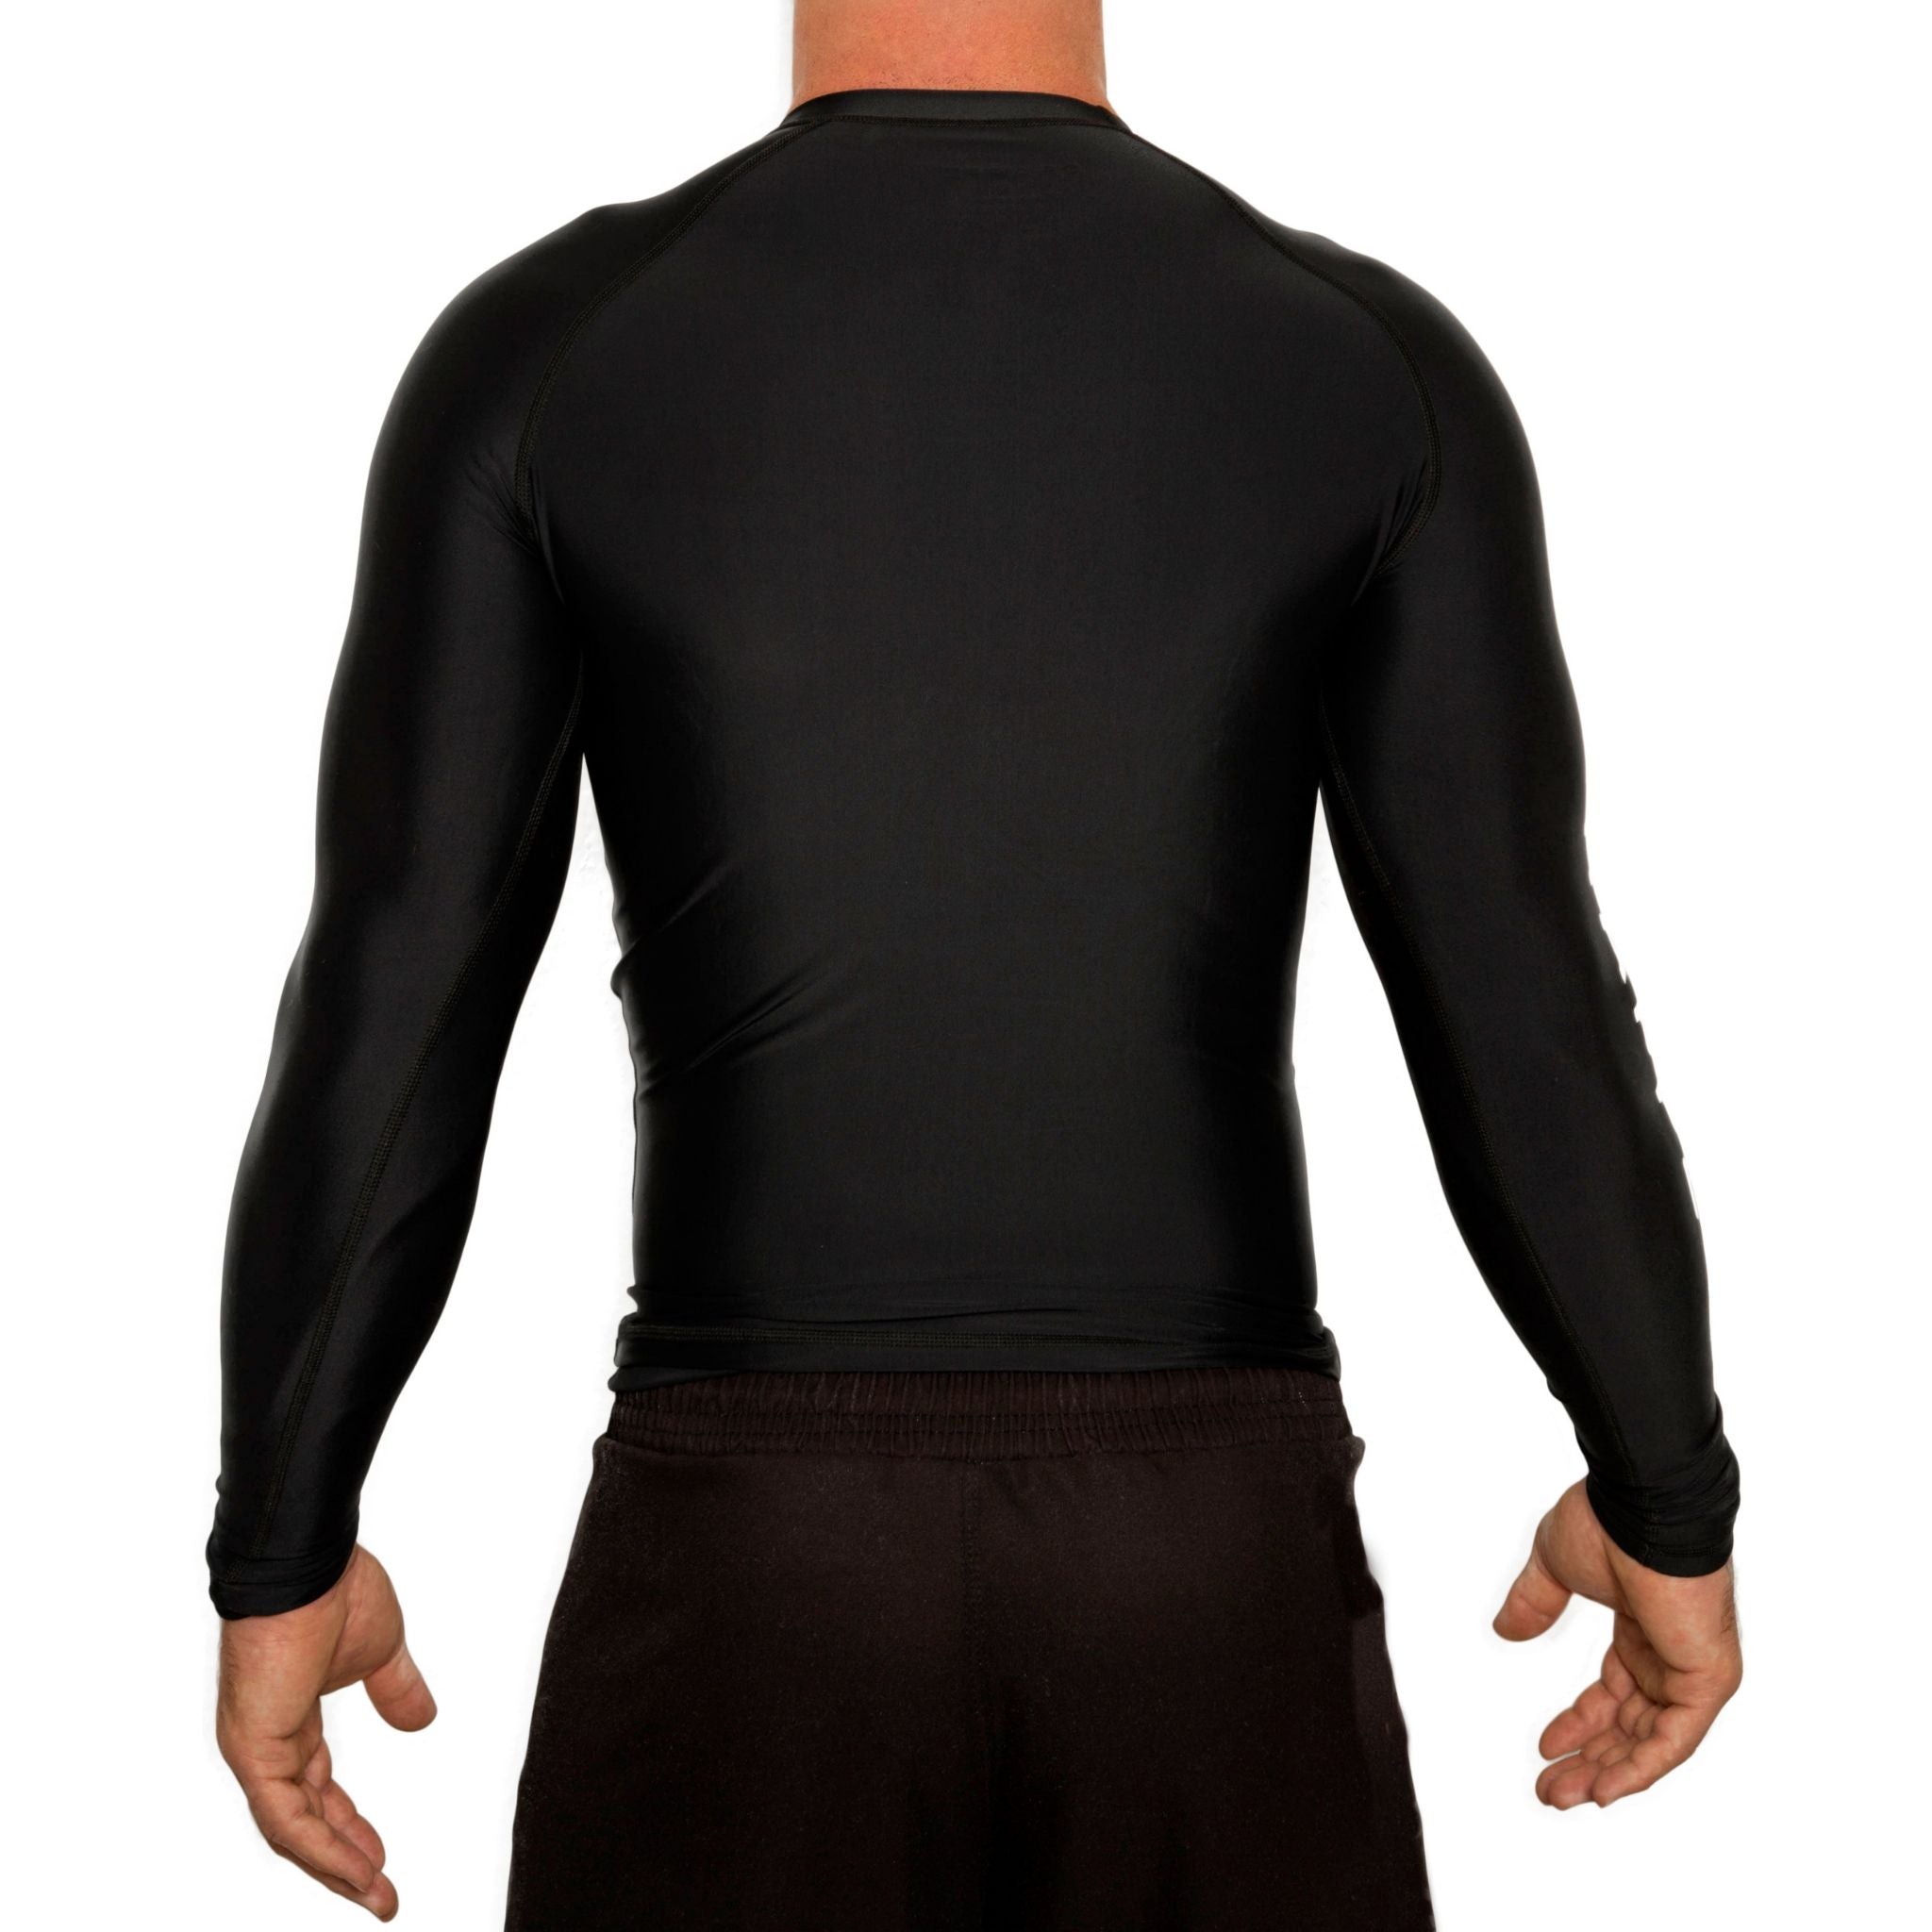  Black Compression Shirts For Men Long Sleeve Workout  Athletic Rash Guard Base Layer Undershirt Gear T Shirt Cool Dry